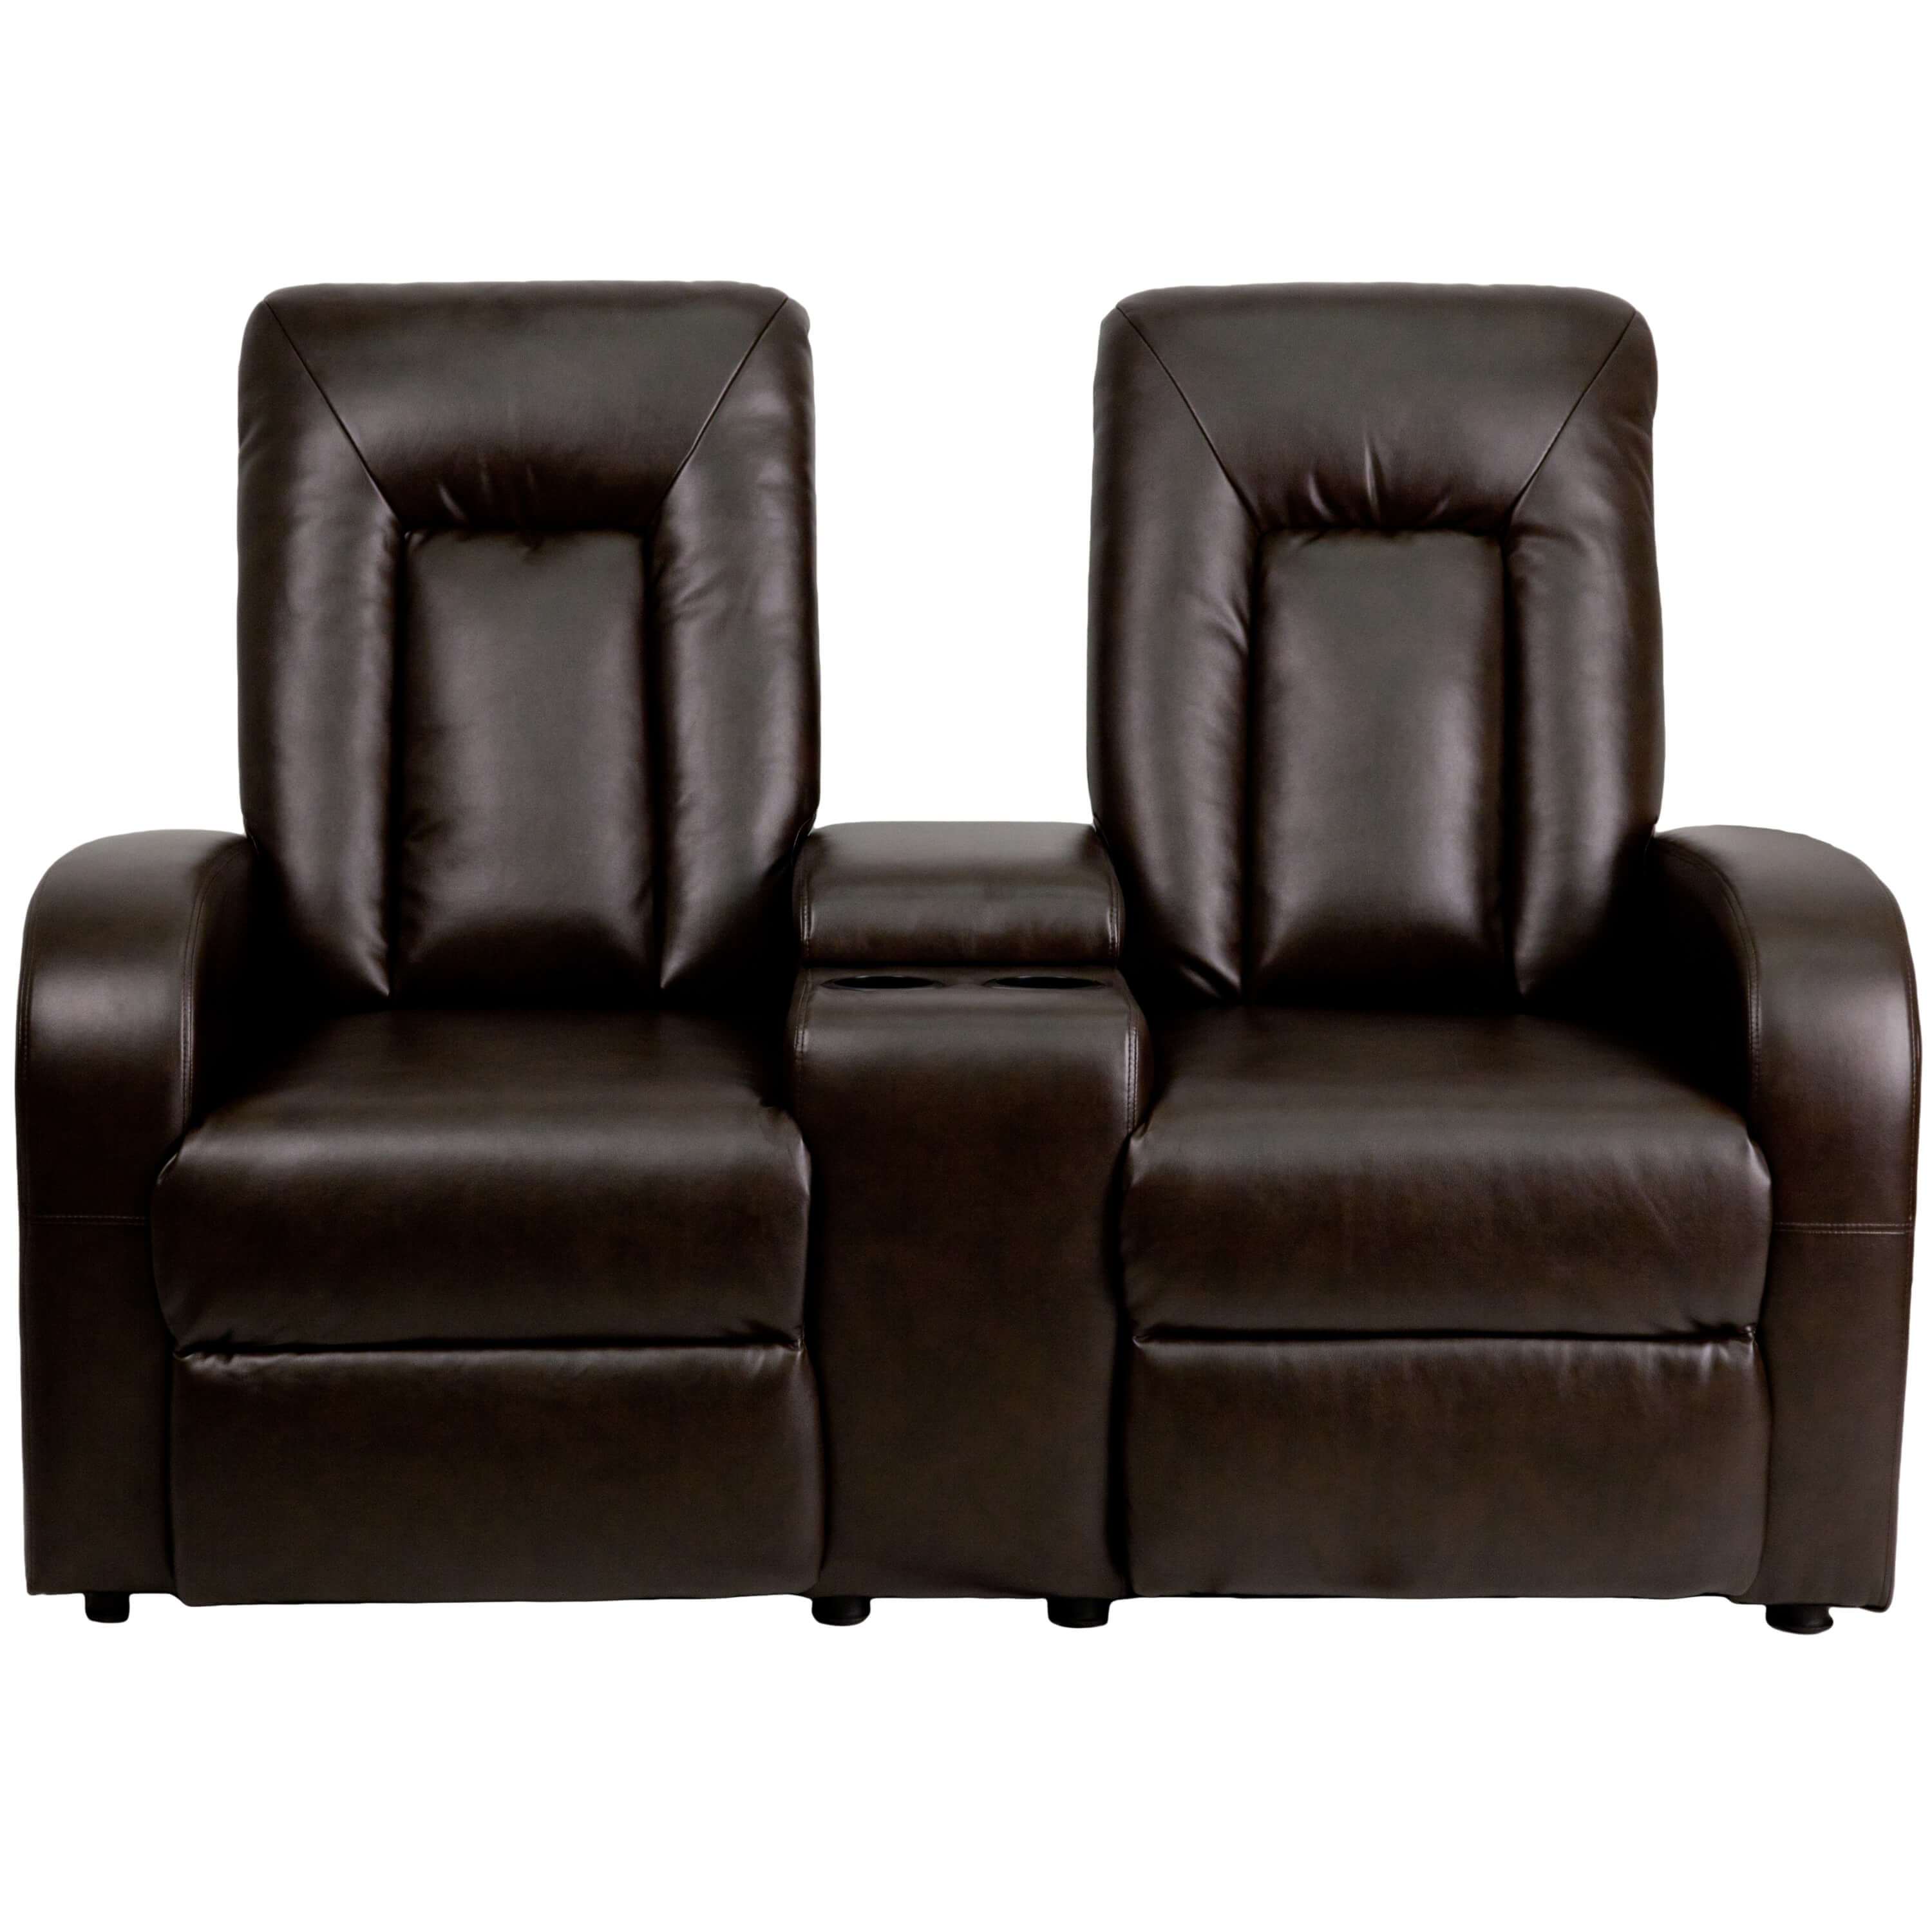 Home Theater Recliners - Hepburn Movie Theatre Couches